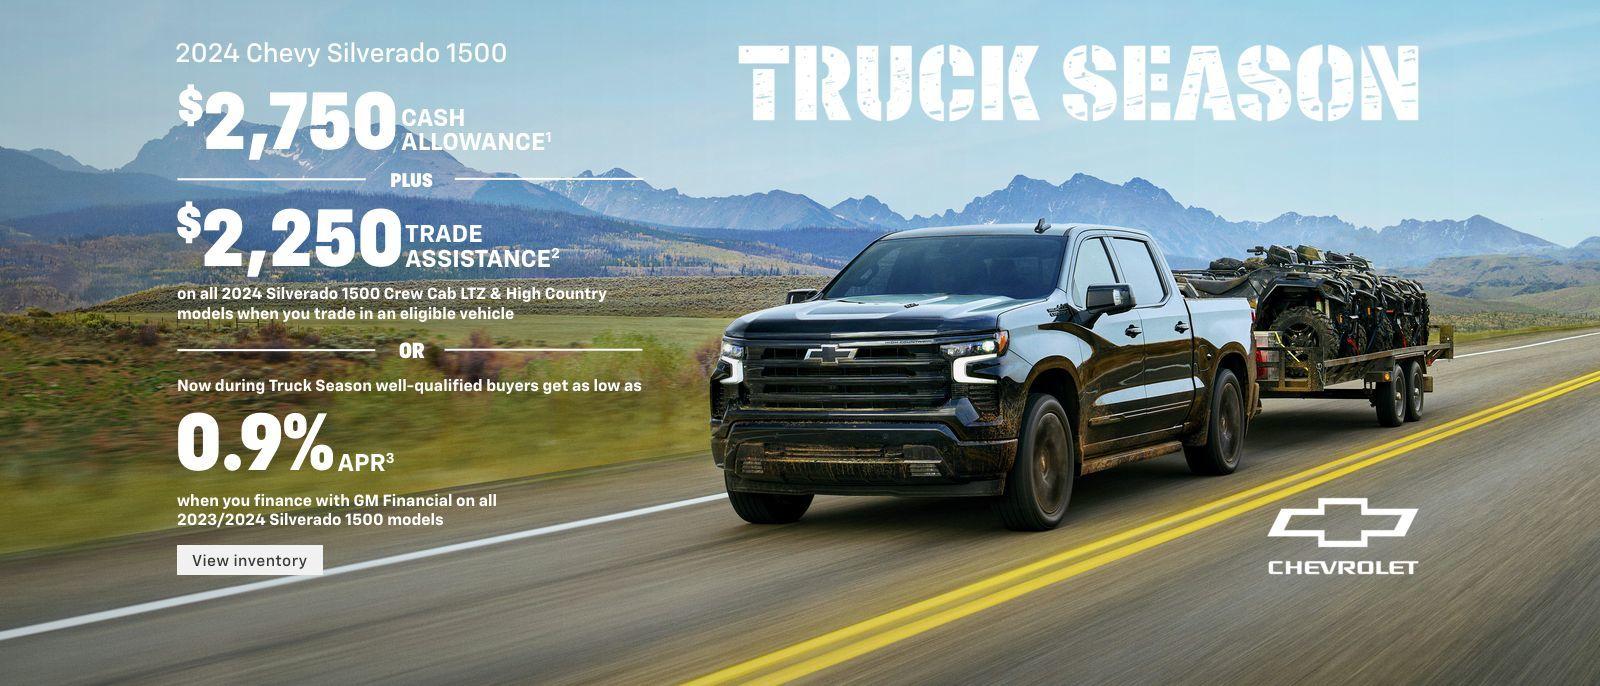 $2,750 cash allowance. Plus, $2,250 trade assistance on all 2024 Silverado 1500 Crew Cab LTZ & High Country models when you trade in an eligible vehicle. Or, now during Truck Season well-qualified buyers get as low as 0.9% APR when you finance with GM Financial on all 2023/2024 Silverado 1500 models.